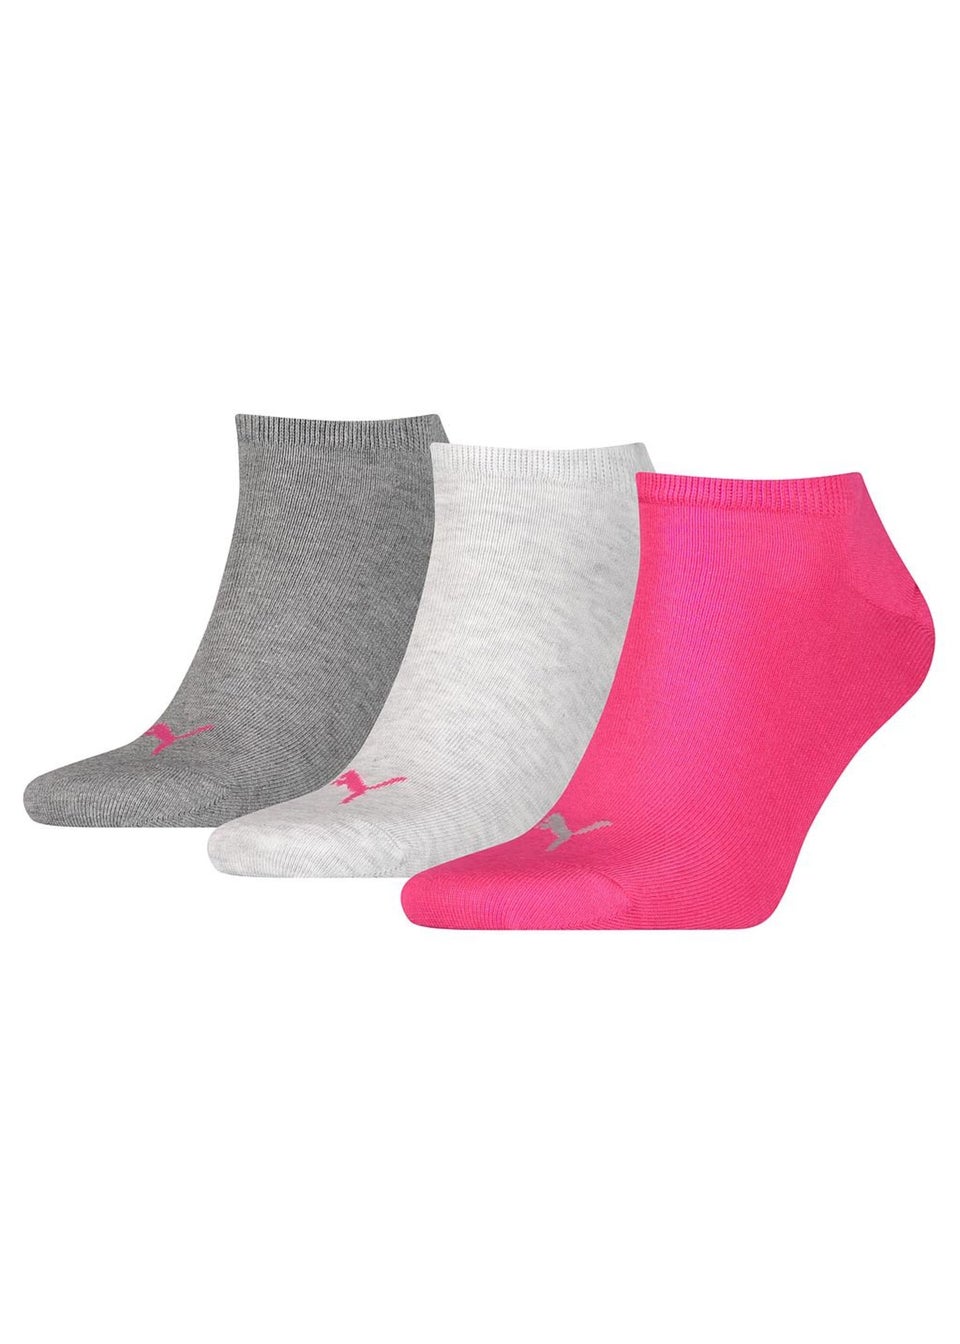 Puma Pink Invisible Socks (Pack of 3)